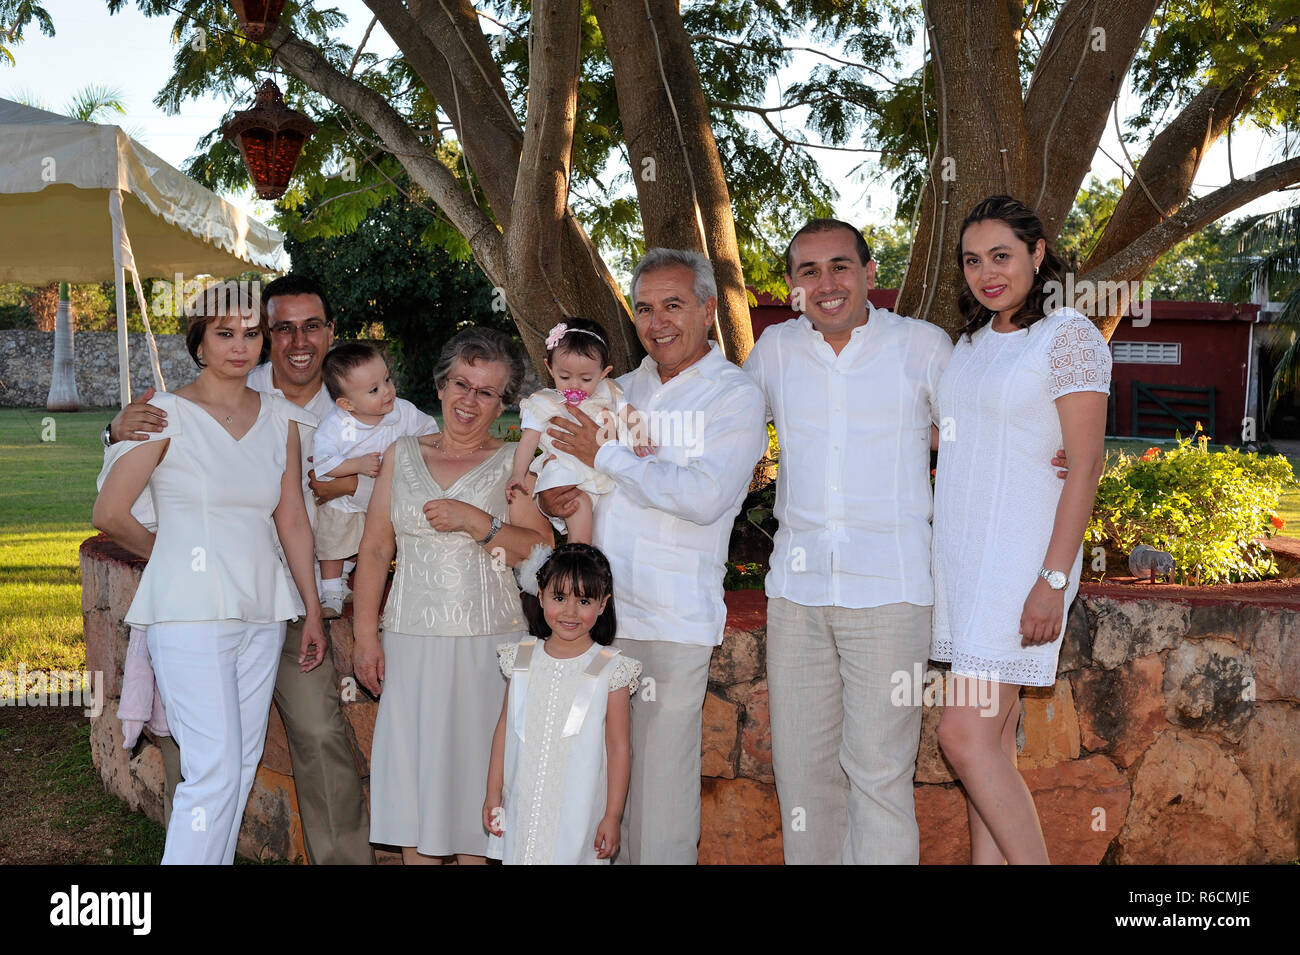 MERIDA, YUC/MEXICO - NOV 13, 2017: Candid family group portrait during baptism party of twin baby boy and girl. Stock Photo